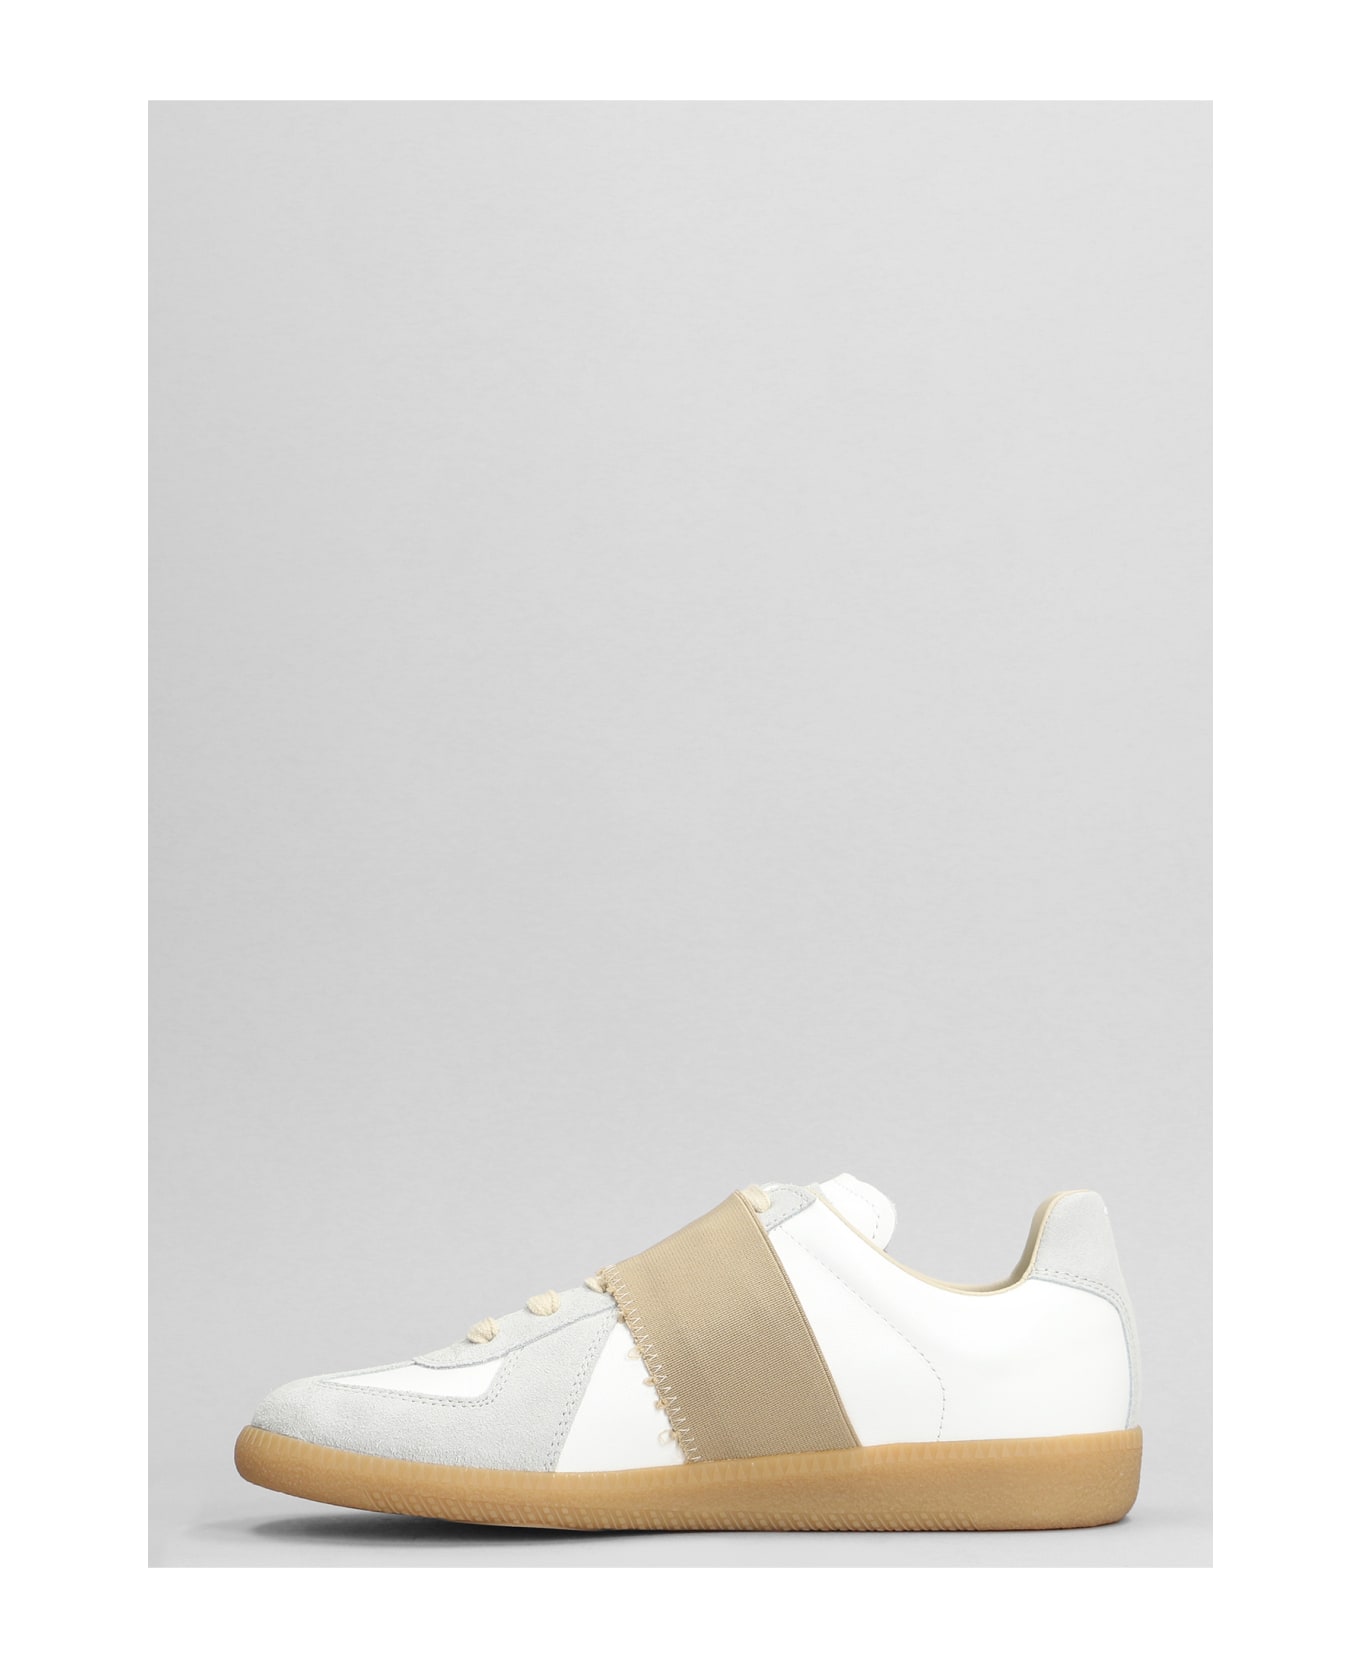 Maison Margiela Replica Sneakers In White Suede And Leather - white スニーカー